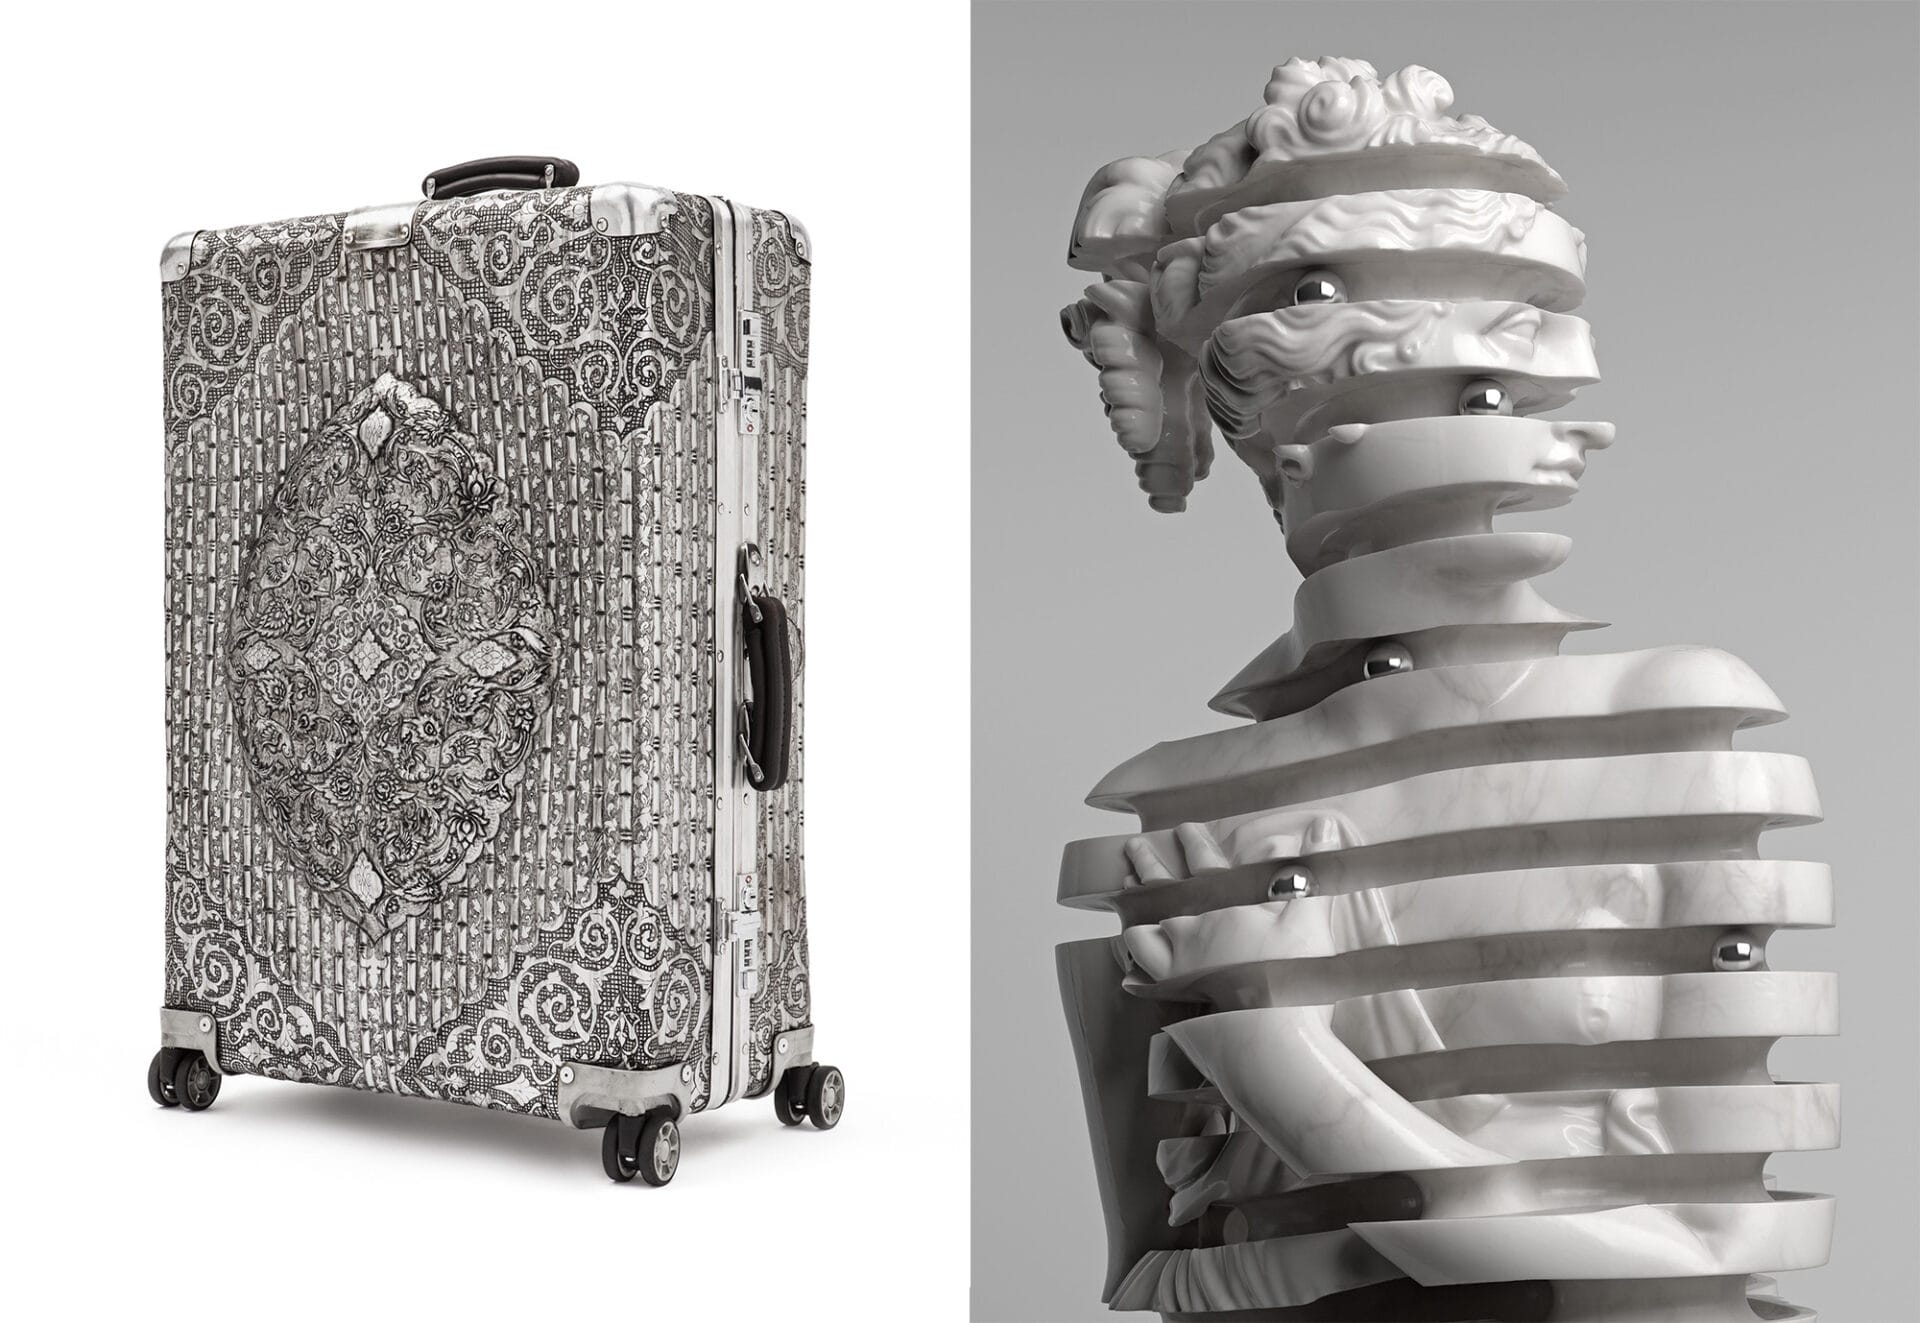 a side-by-side image of two artworks, on the left: an elaborate metallic rolling suitcase, and on the right: a classical Venus sculpture, the "Venus Italica" reimagined as a ball track in which a marble can follow a path all the way around from top to bottom